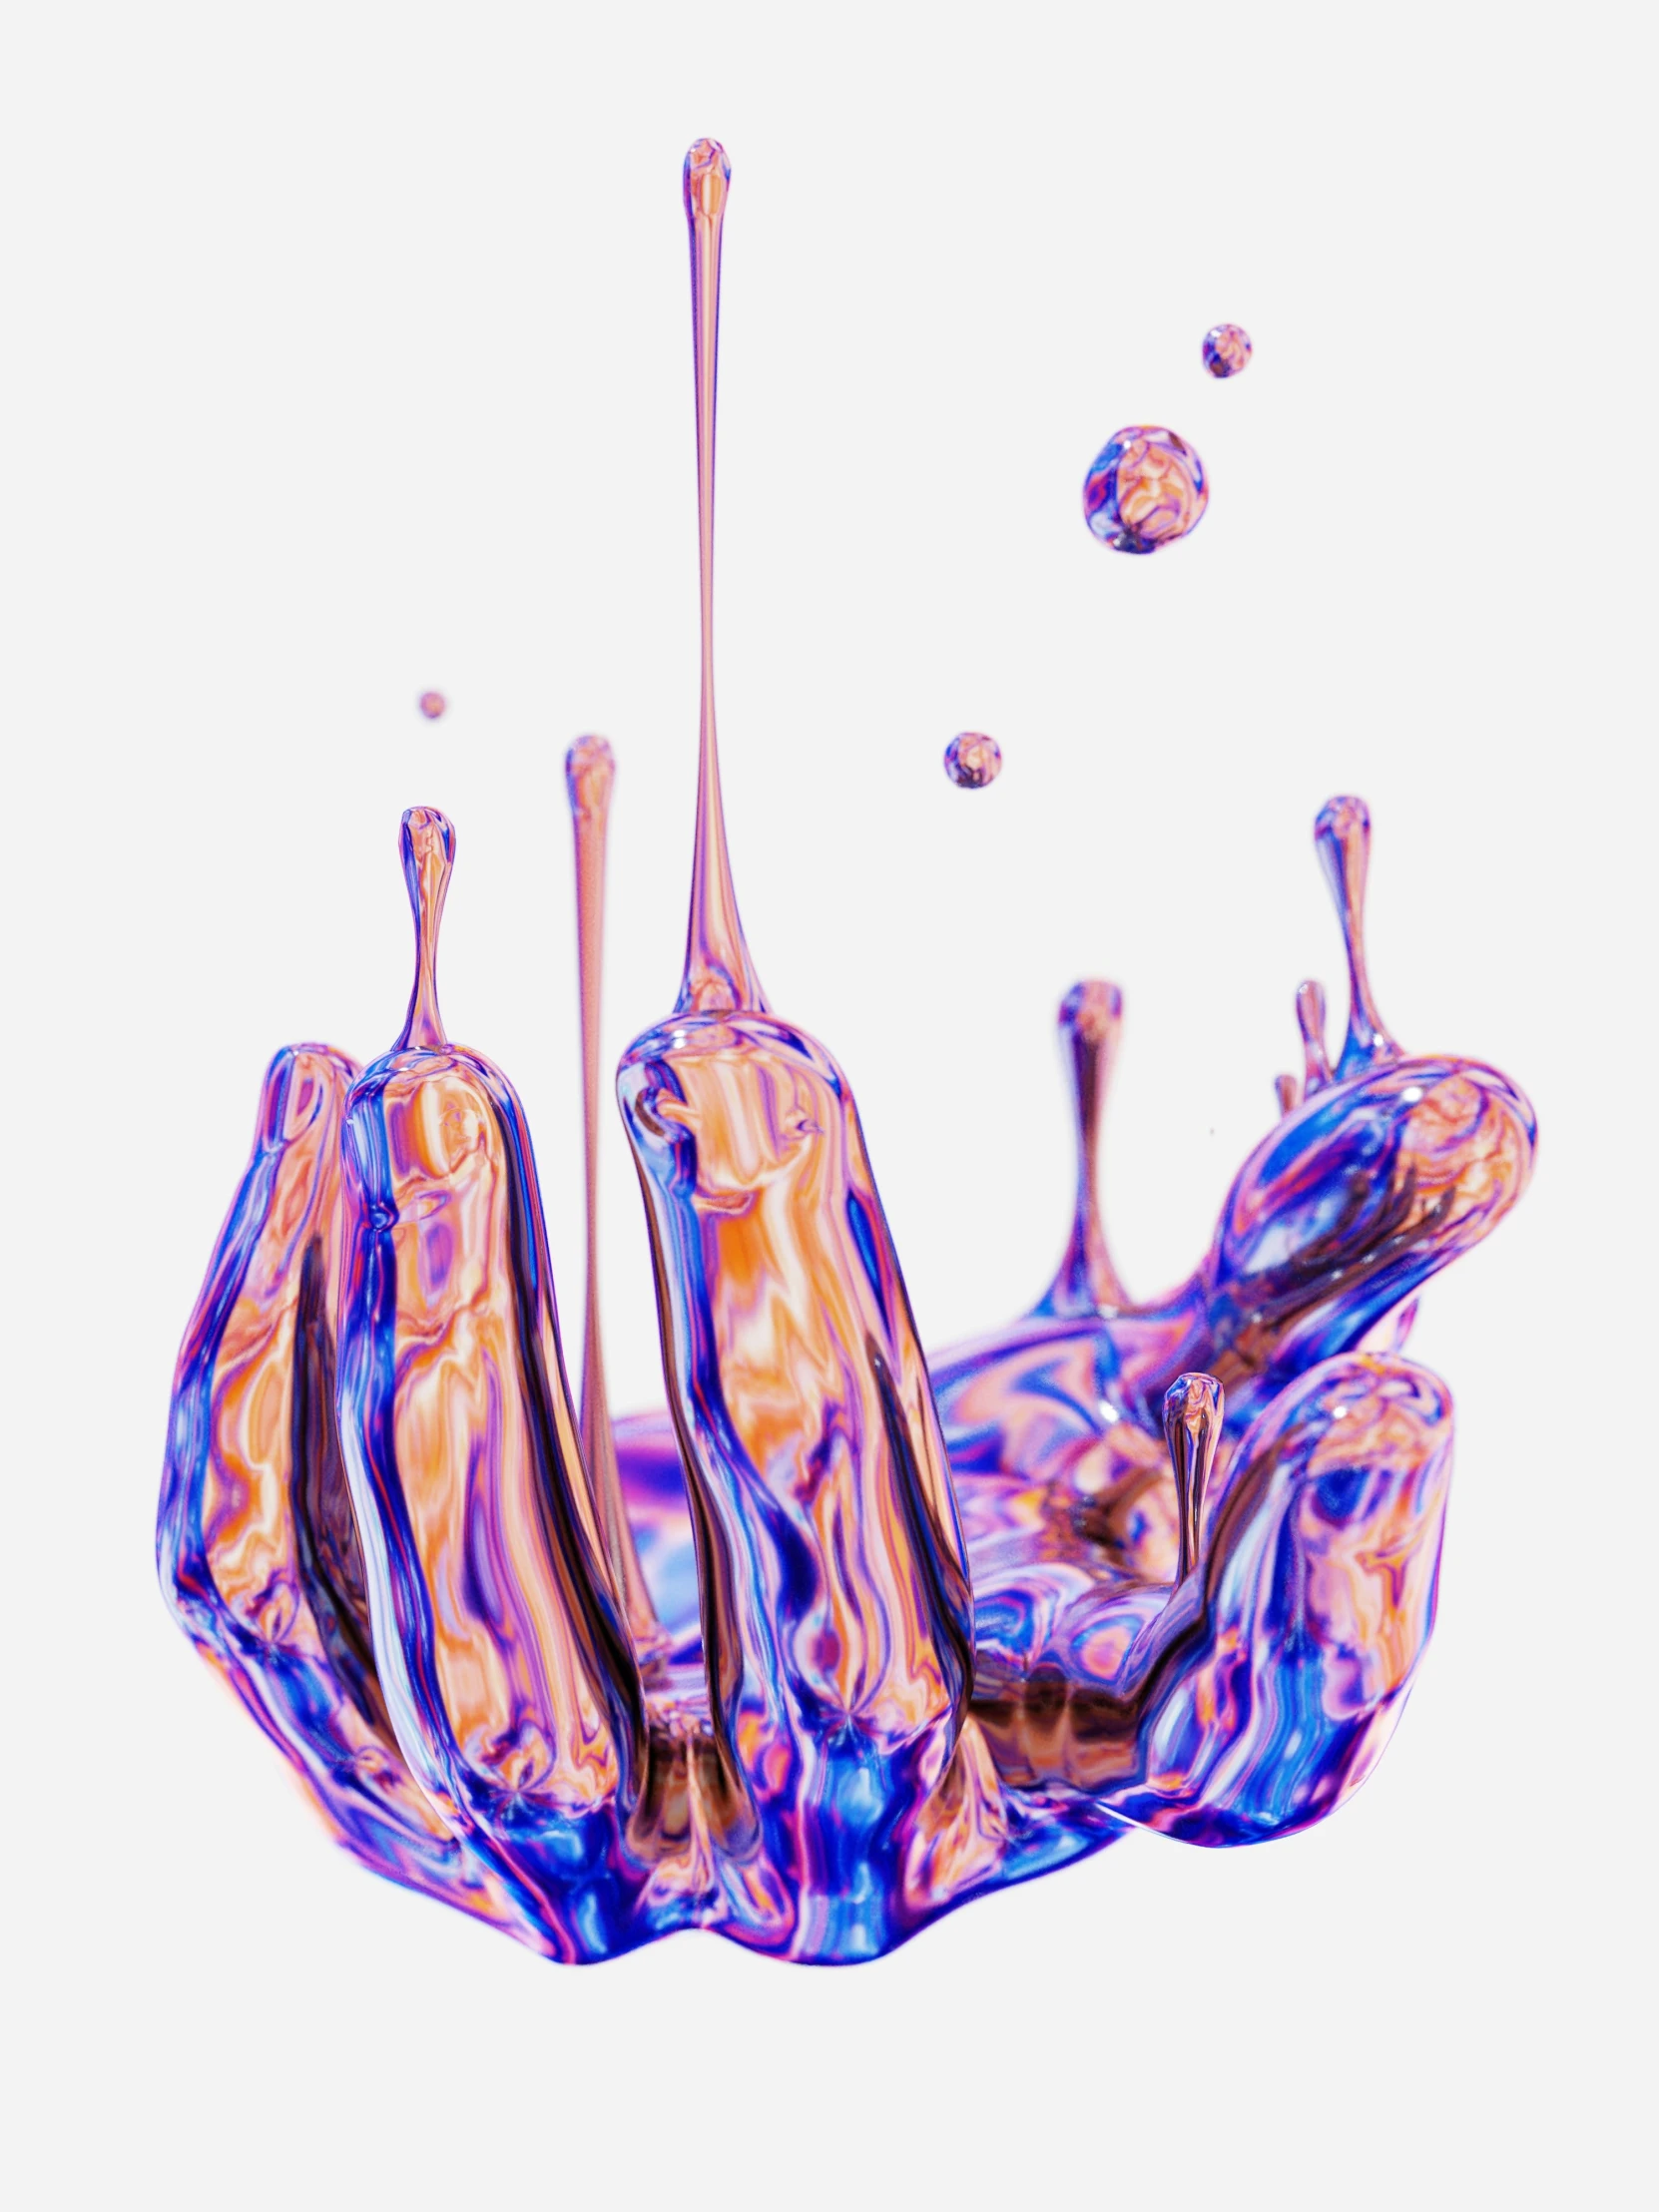 an object appears to be made up of a liquid